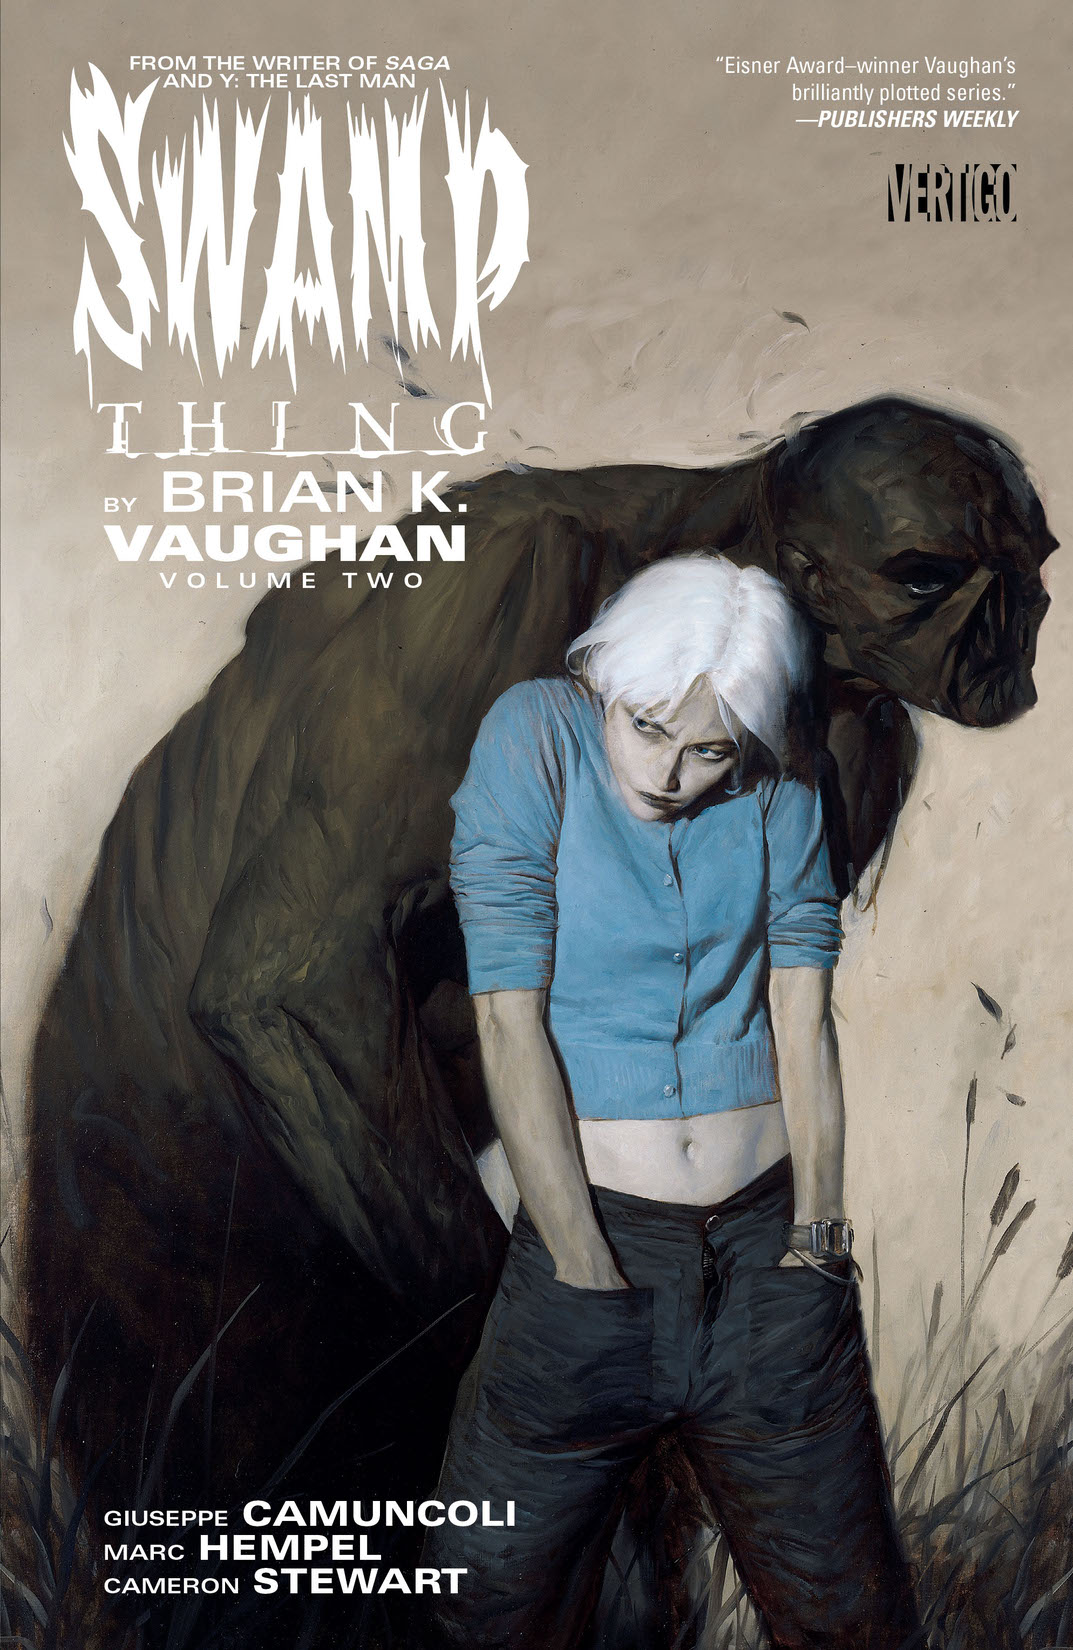 Swamp Thing by Brian K. Vaughan Vol. 2 preview images